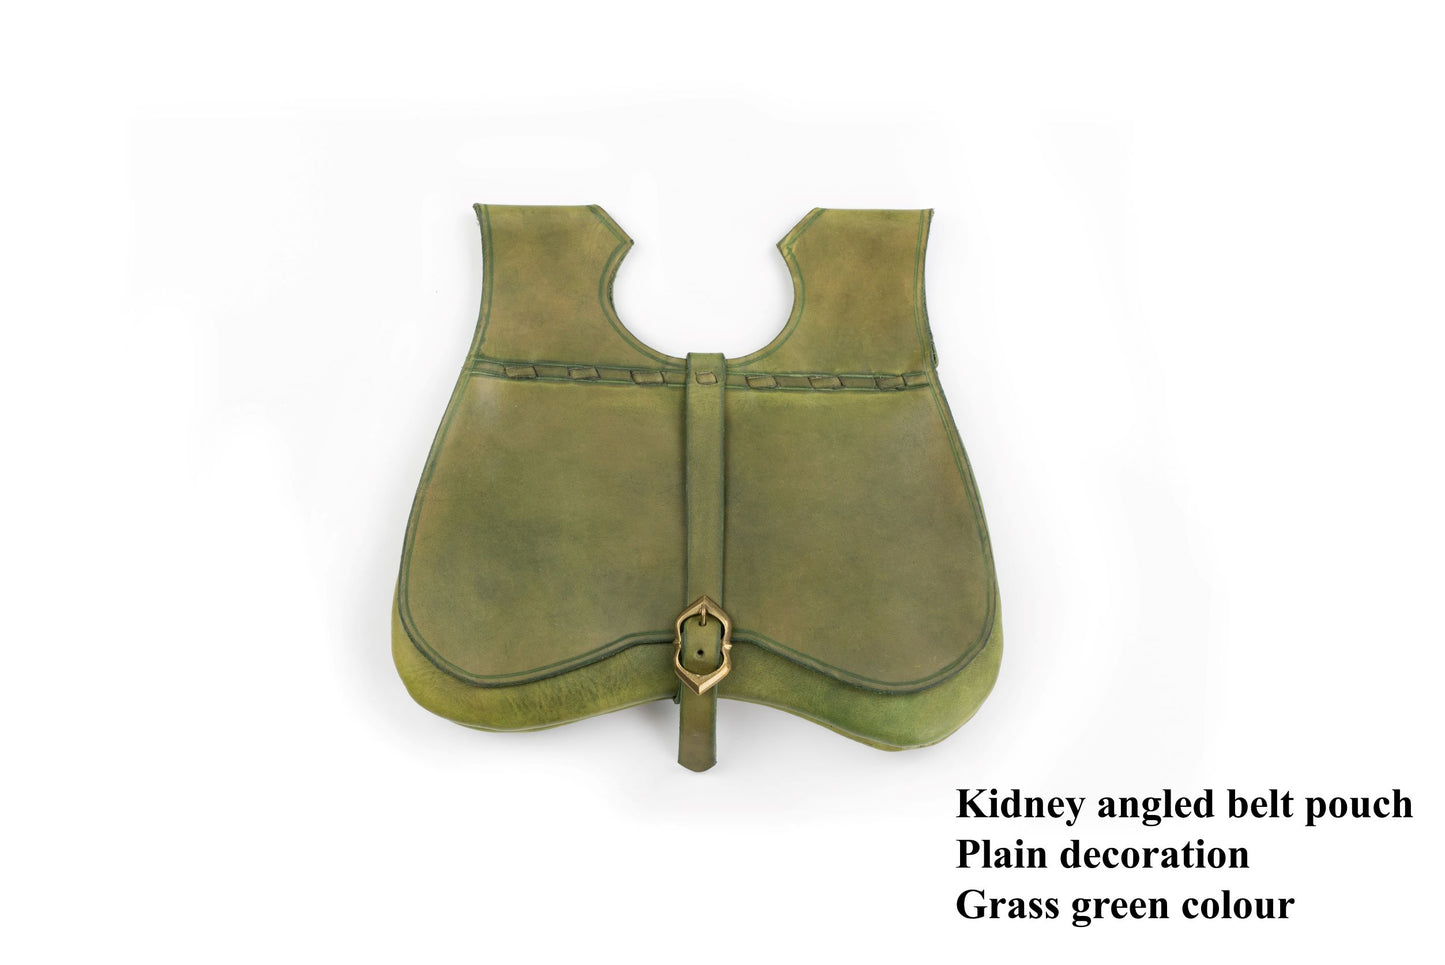 Belt pouch - kidney angled